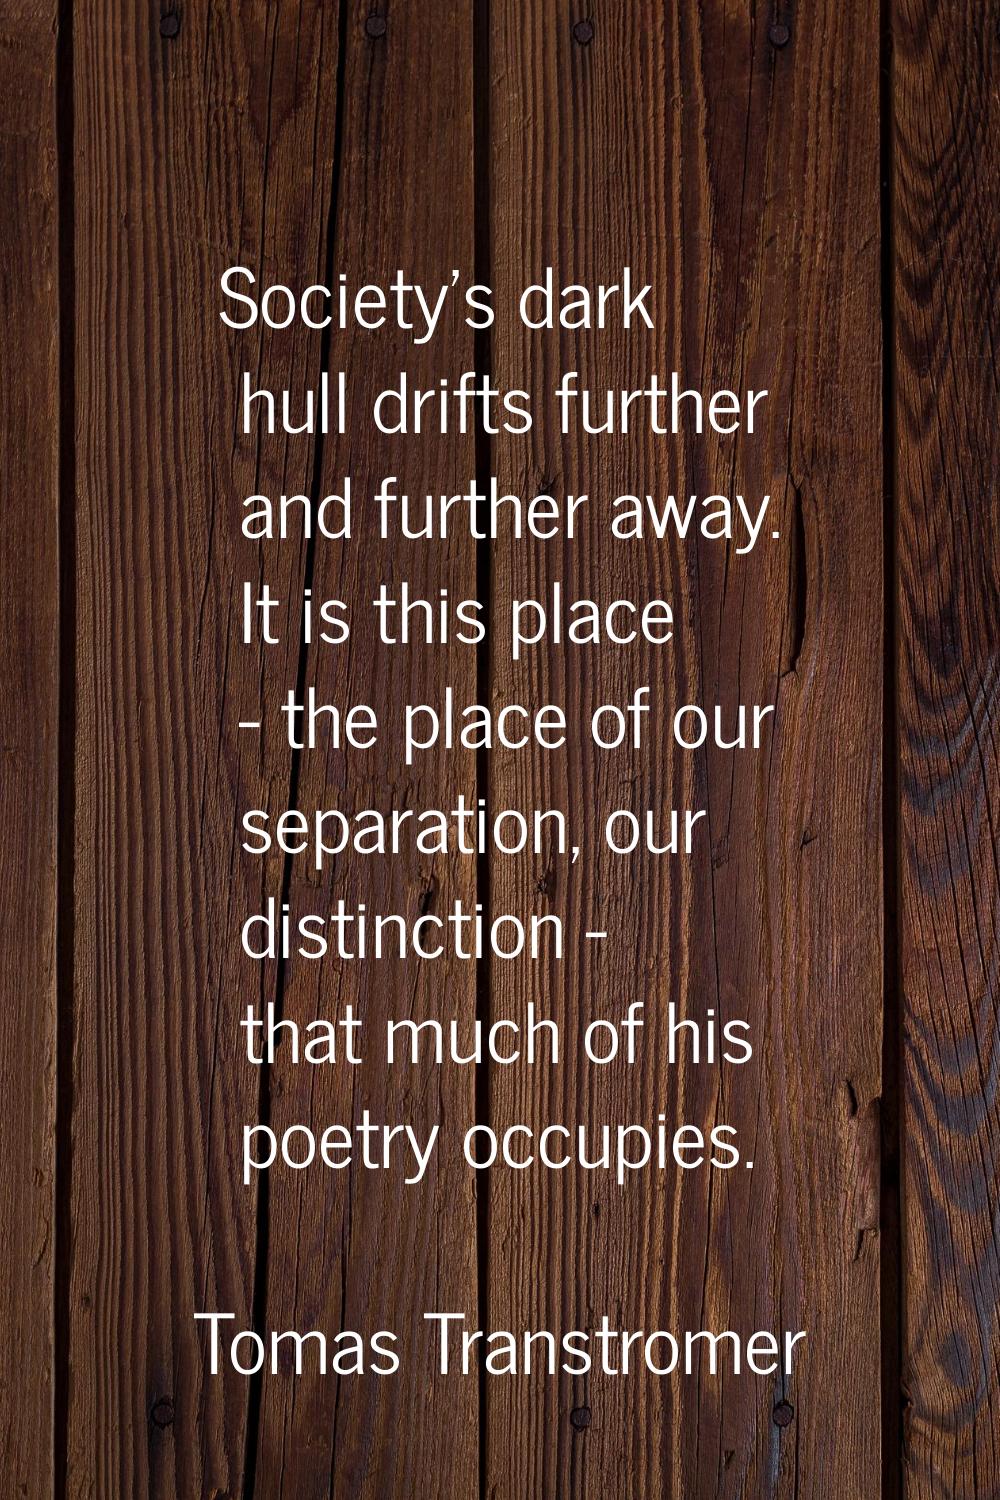 Society's dark hull drifts further and further away. It is this place - the place of our separation